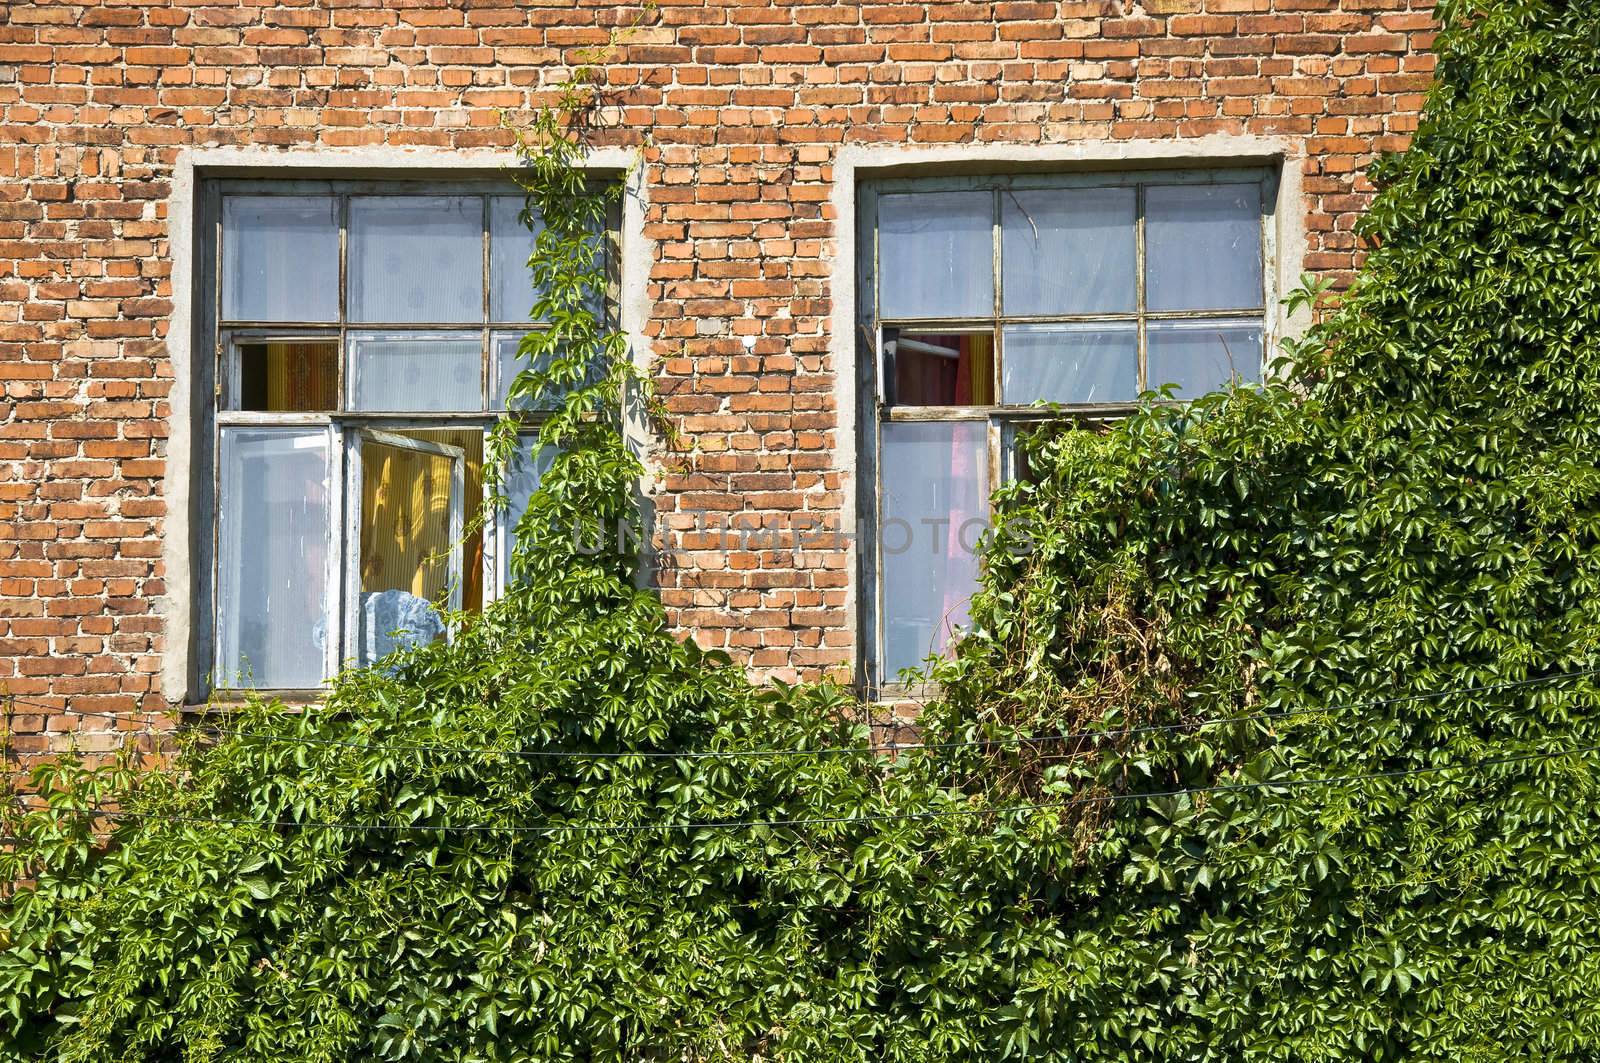 A pair of windows in an old brick wall. Leaves plant closes a small portion of the windows. Detail of the facade. Outdoor.